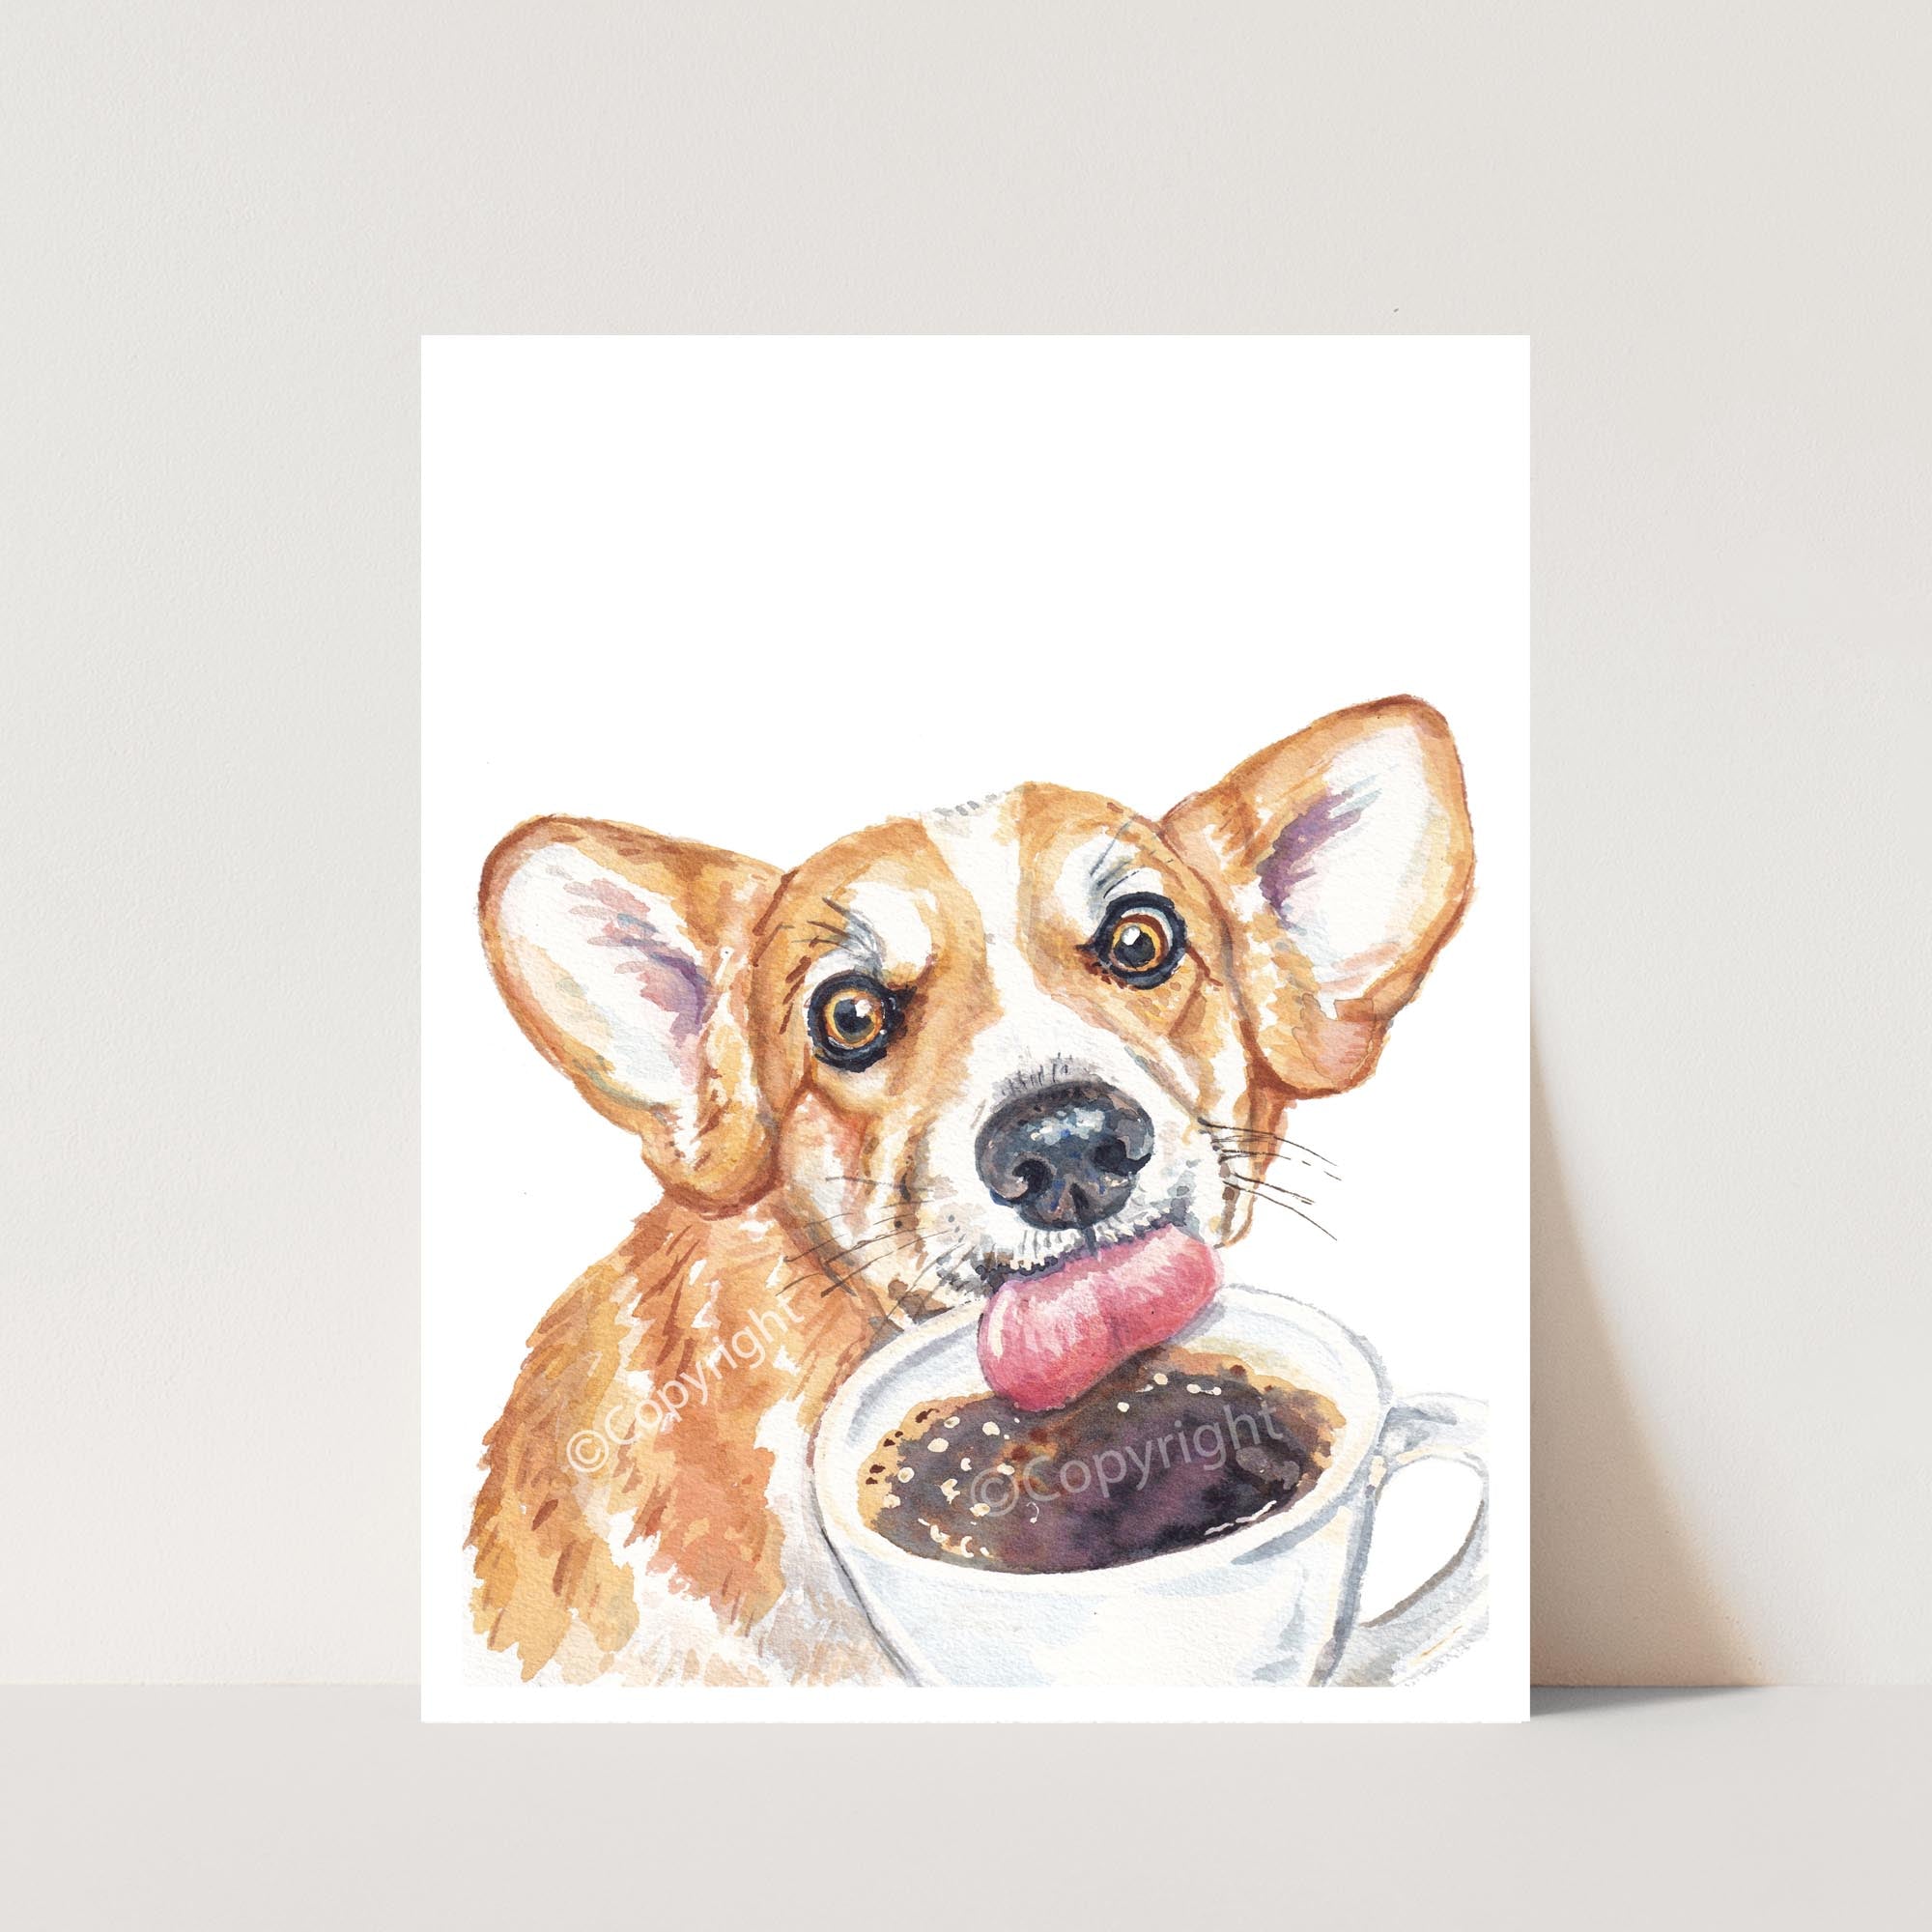 Watercolour painting of a corgi dog drinking coffee from a cup by Deidre Wicks